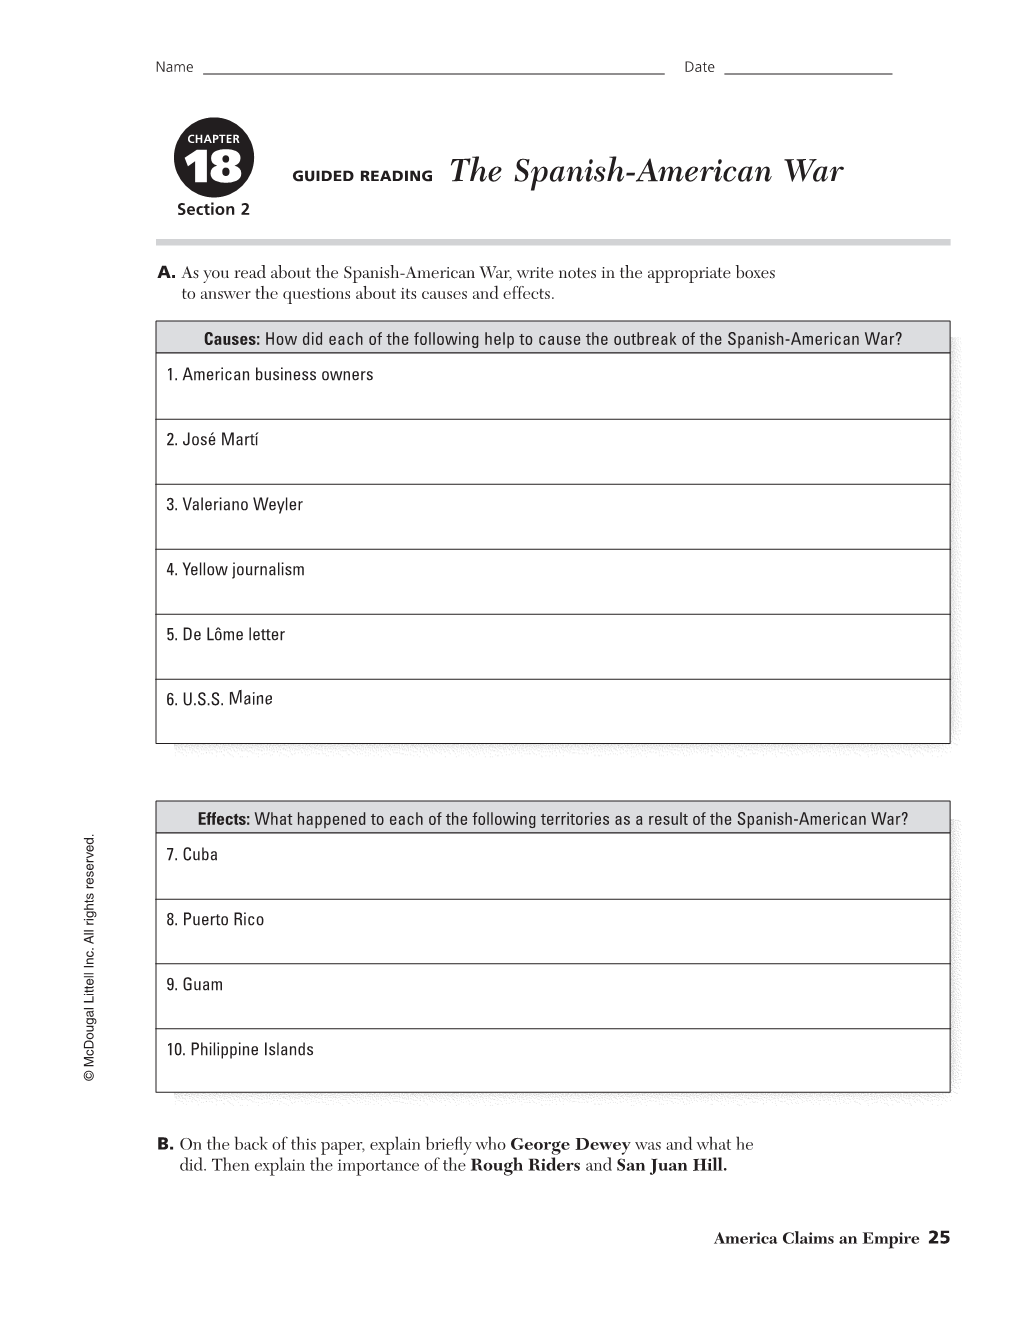 The Spanish-American War Section 2